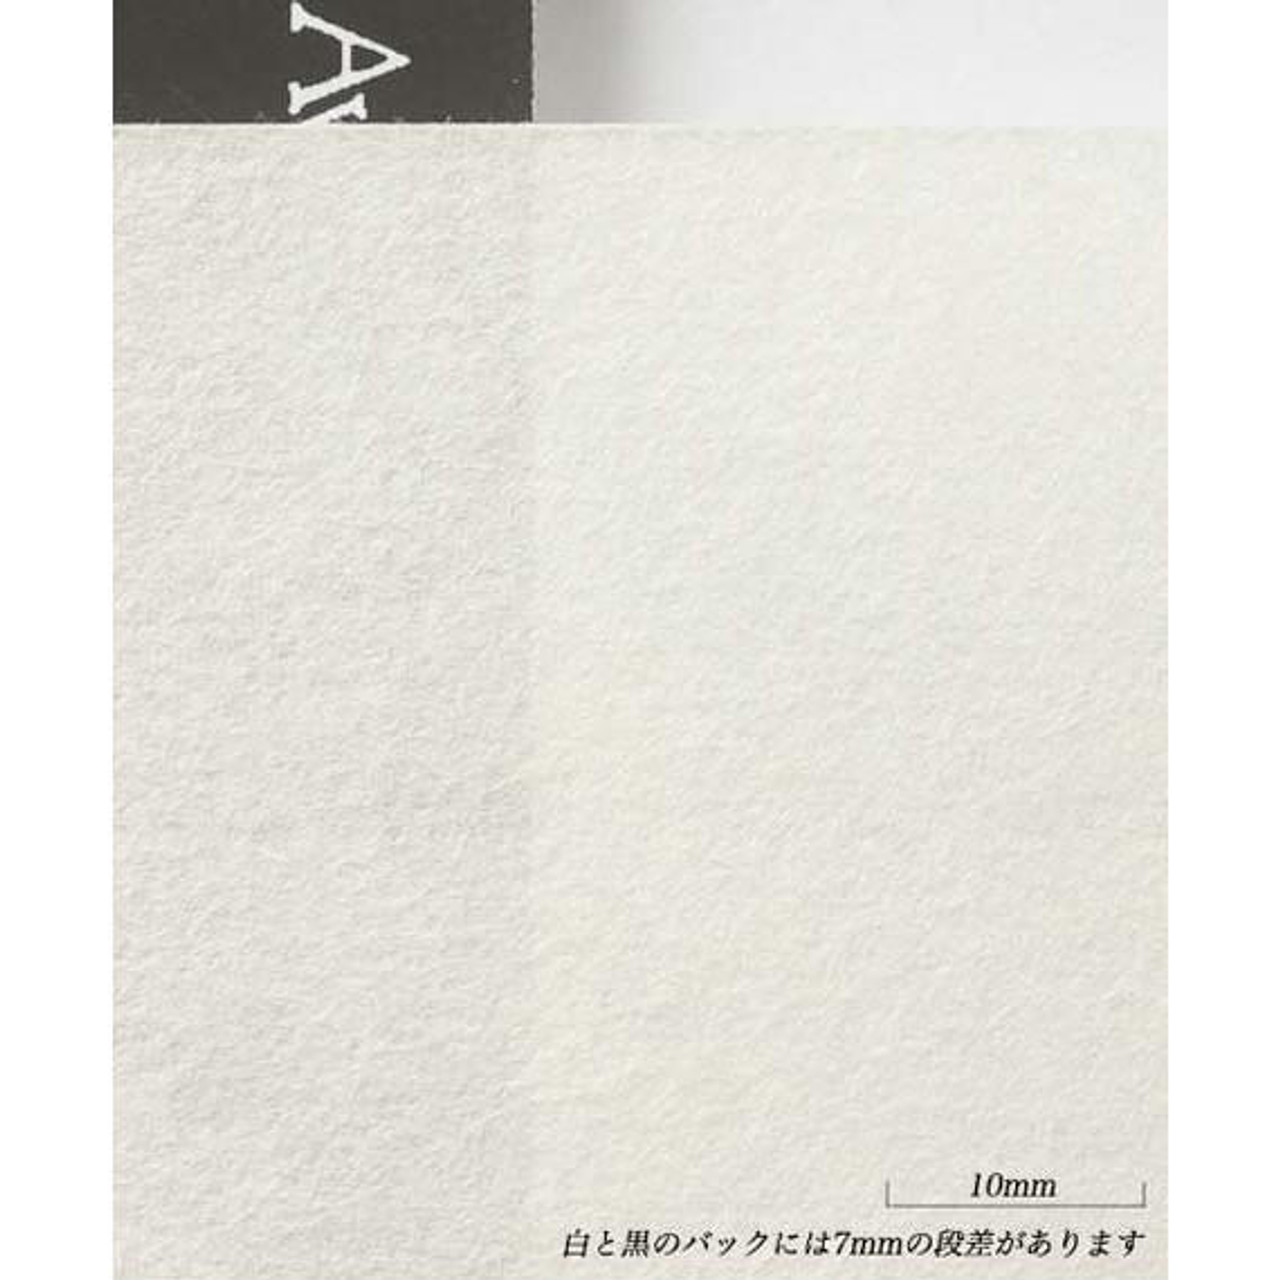 50 Sheets Mulberry Paper Sheets Craft Paper Painting Papers for